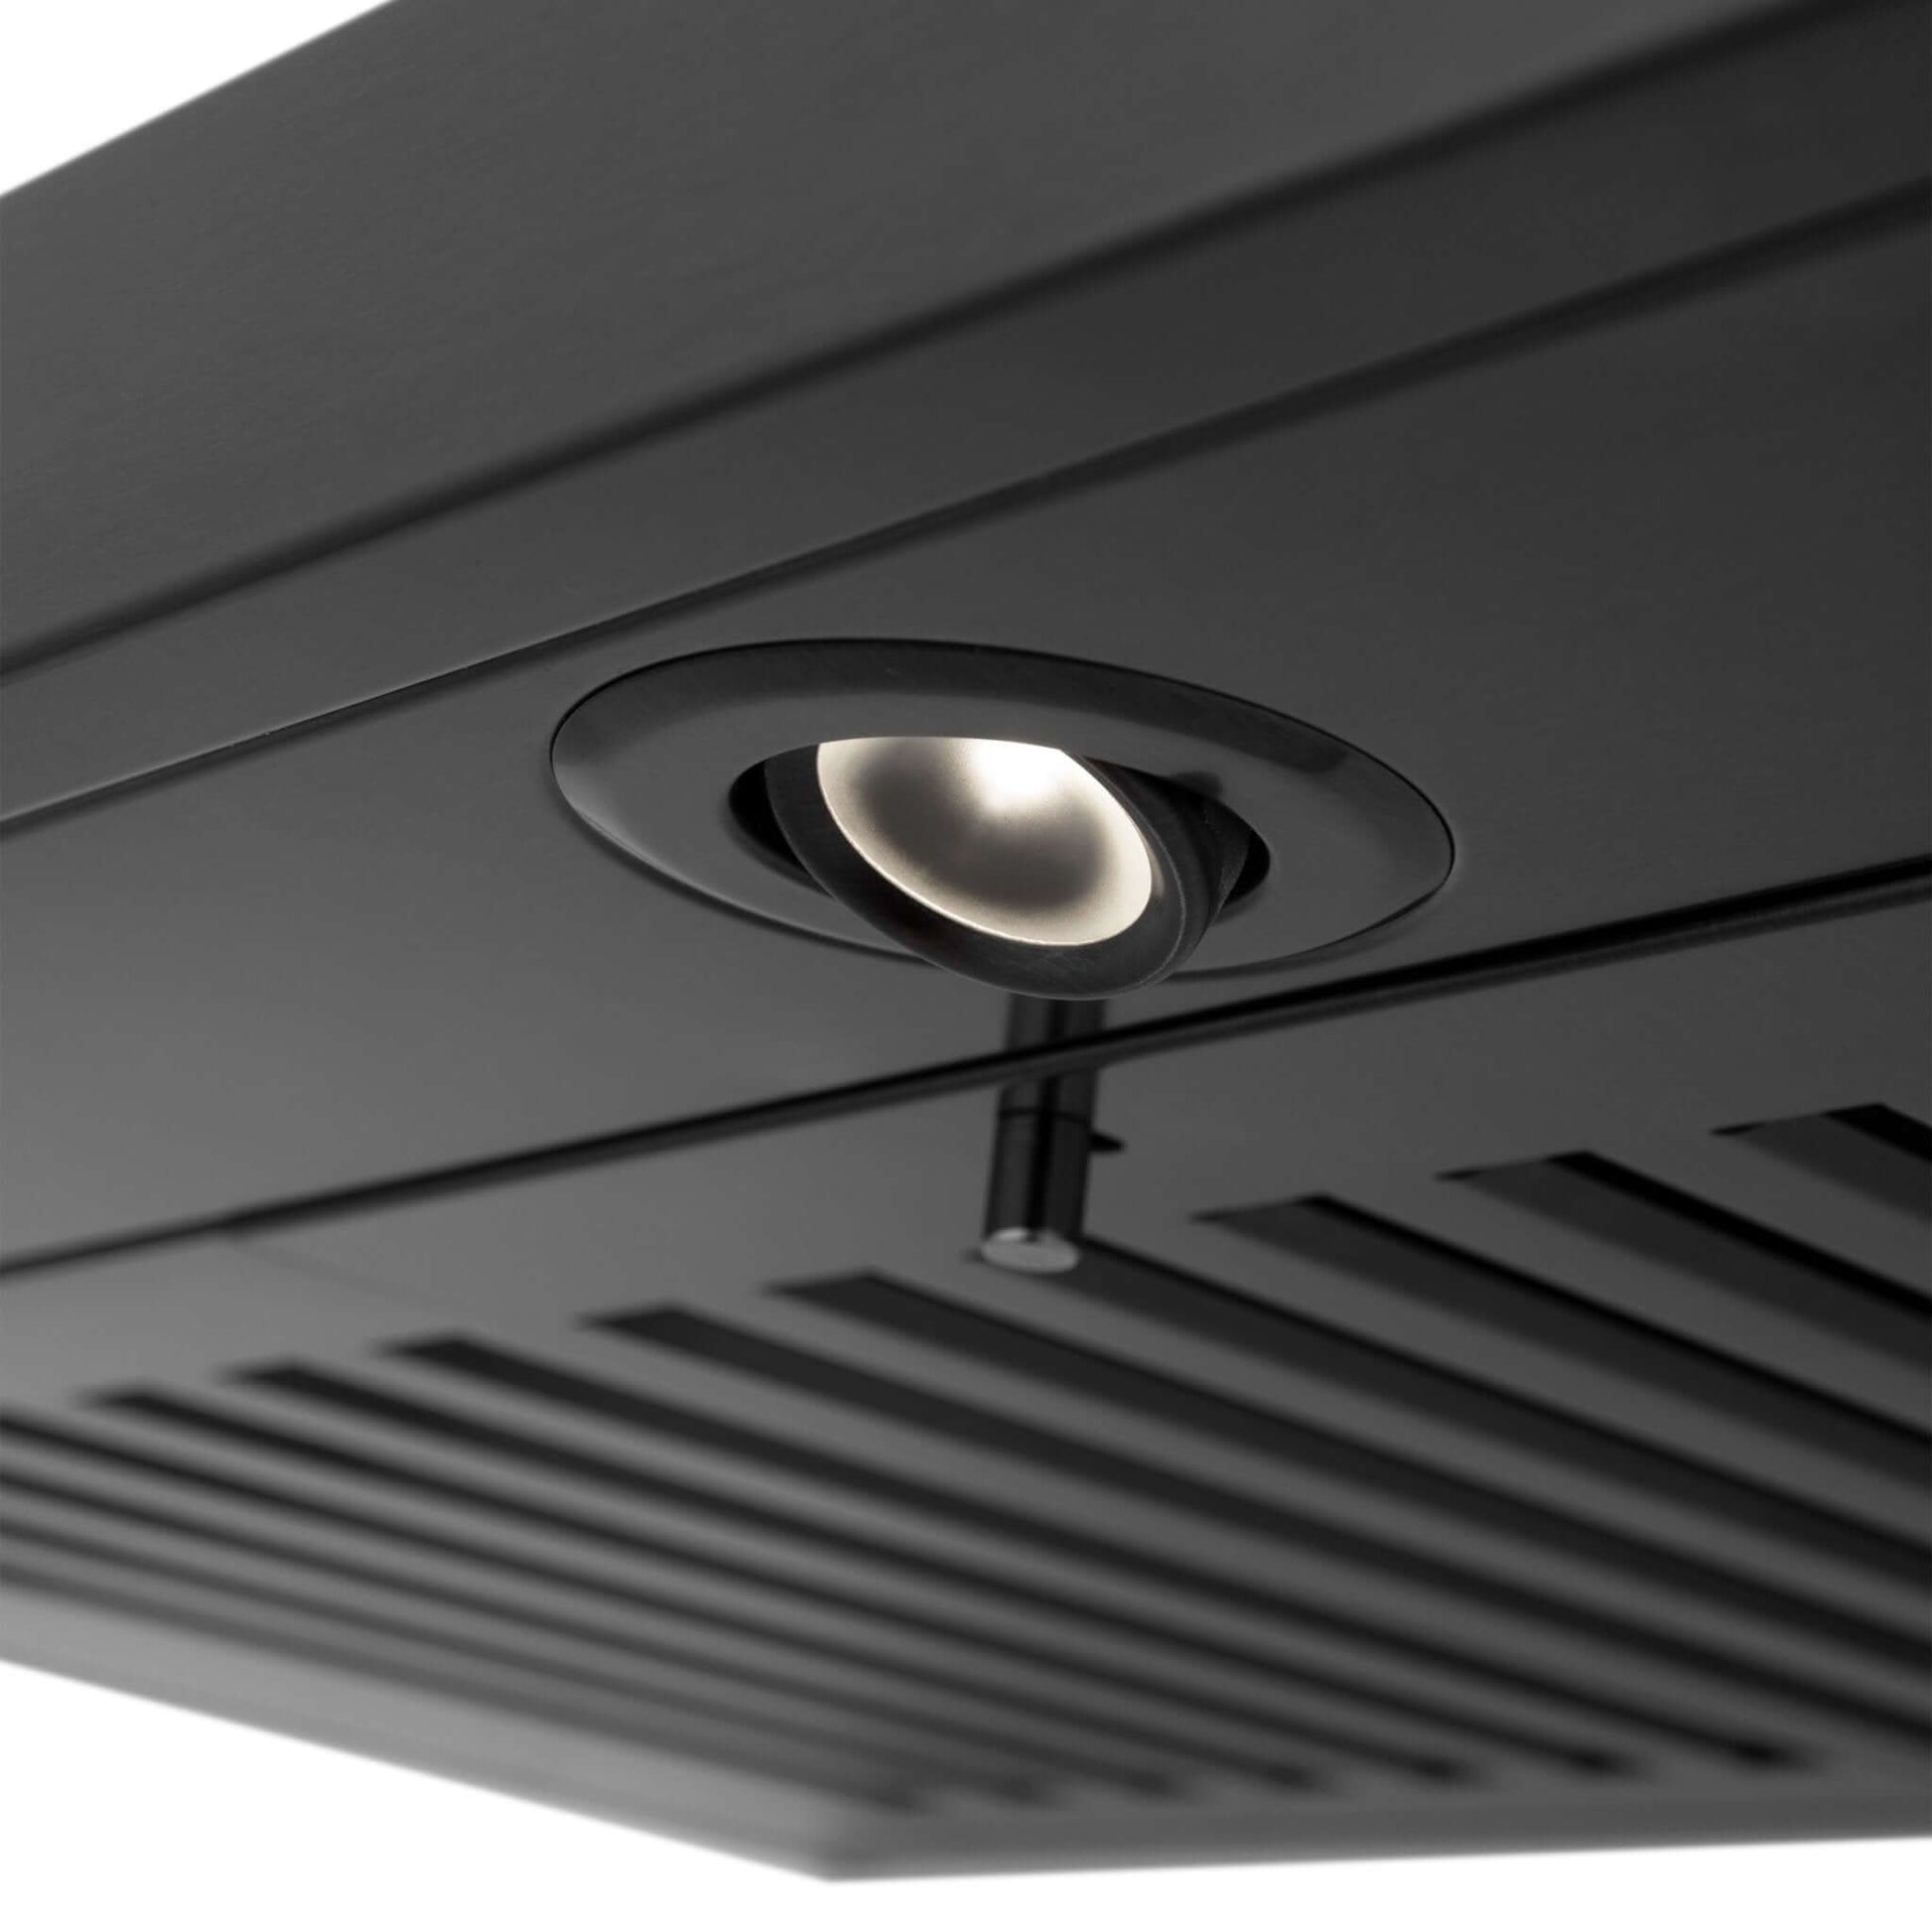 ZLINE Convertible Vent Wall Mount Range Hood in Black Stainless Steel with Crown Molding (BSKBNCRN) LED lighting